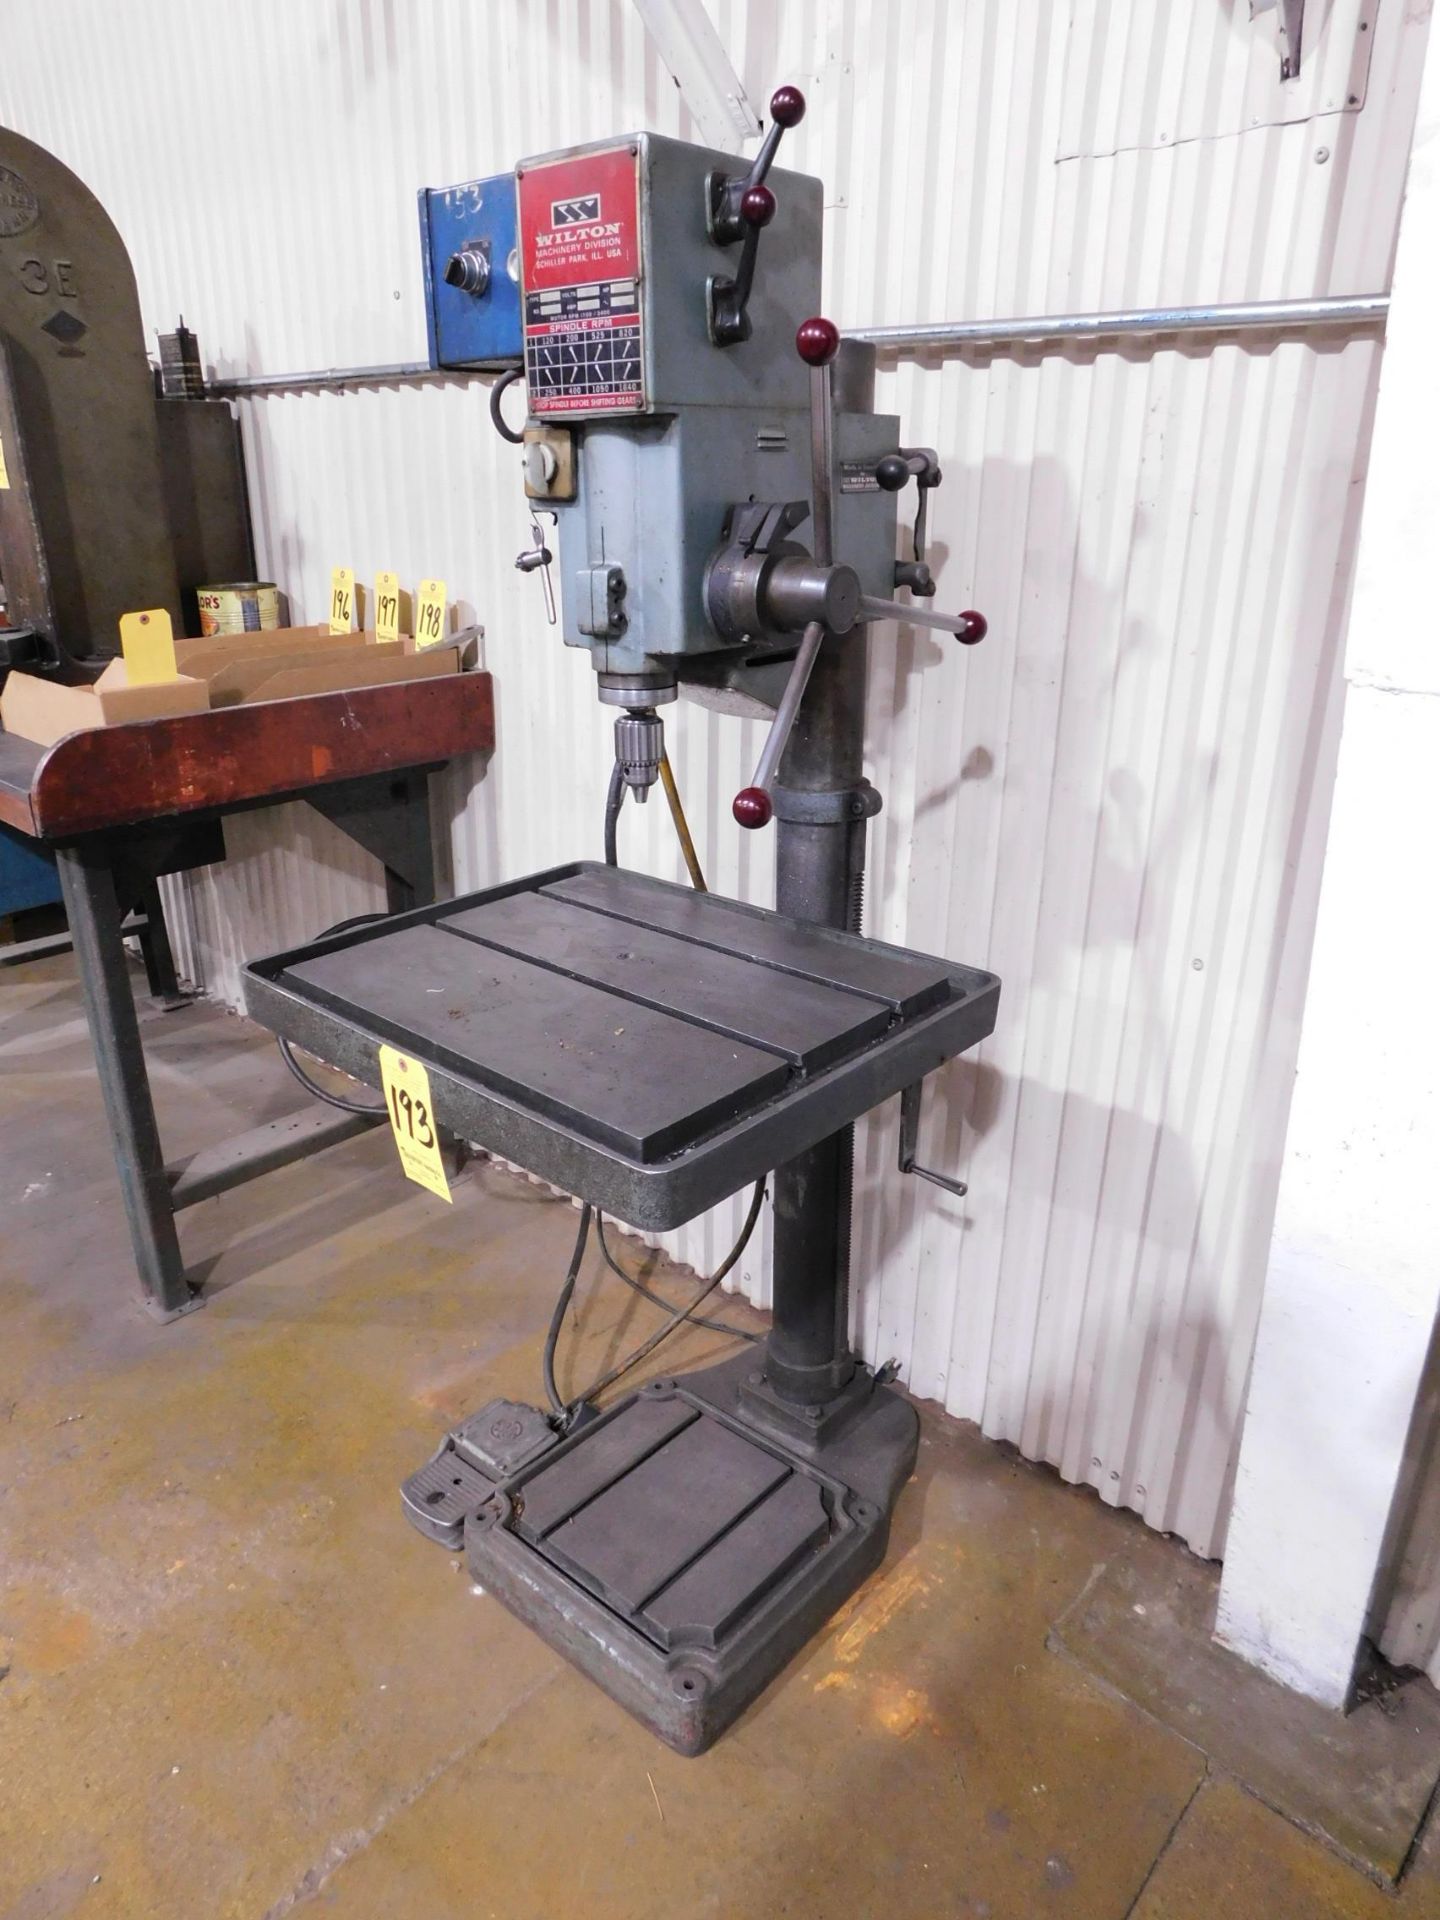 Wilton Model 20600, 20" Geared Head Drill Press, s/n 36472, 3 MT Spindle, 24" X 20" Production